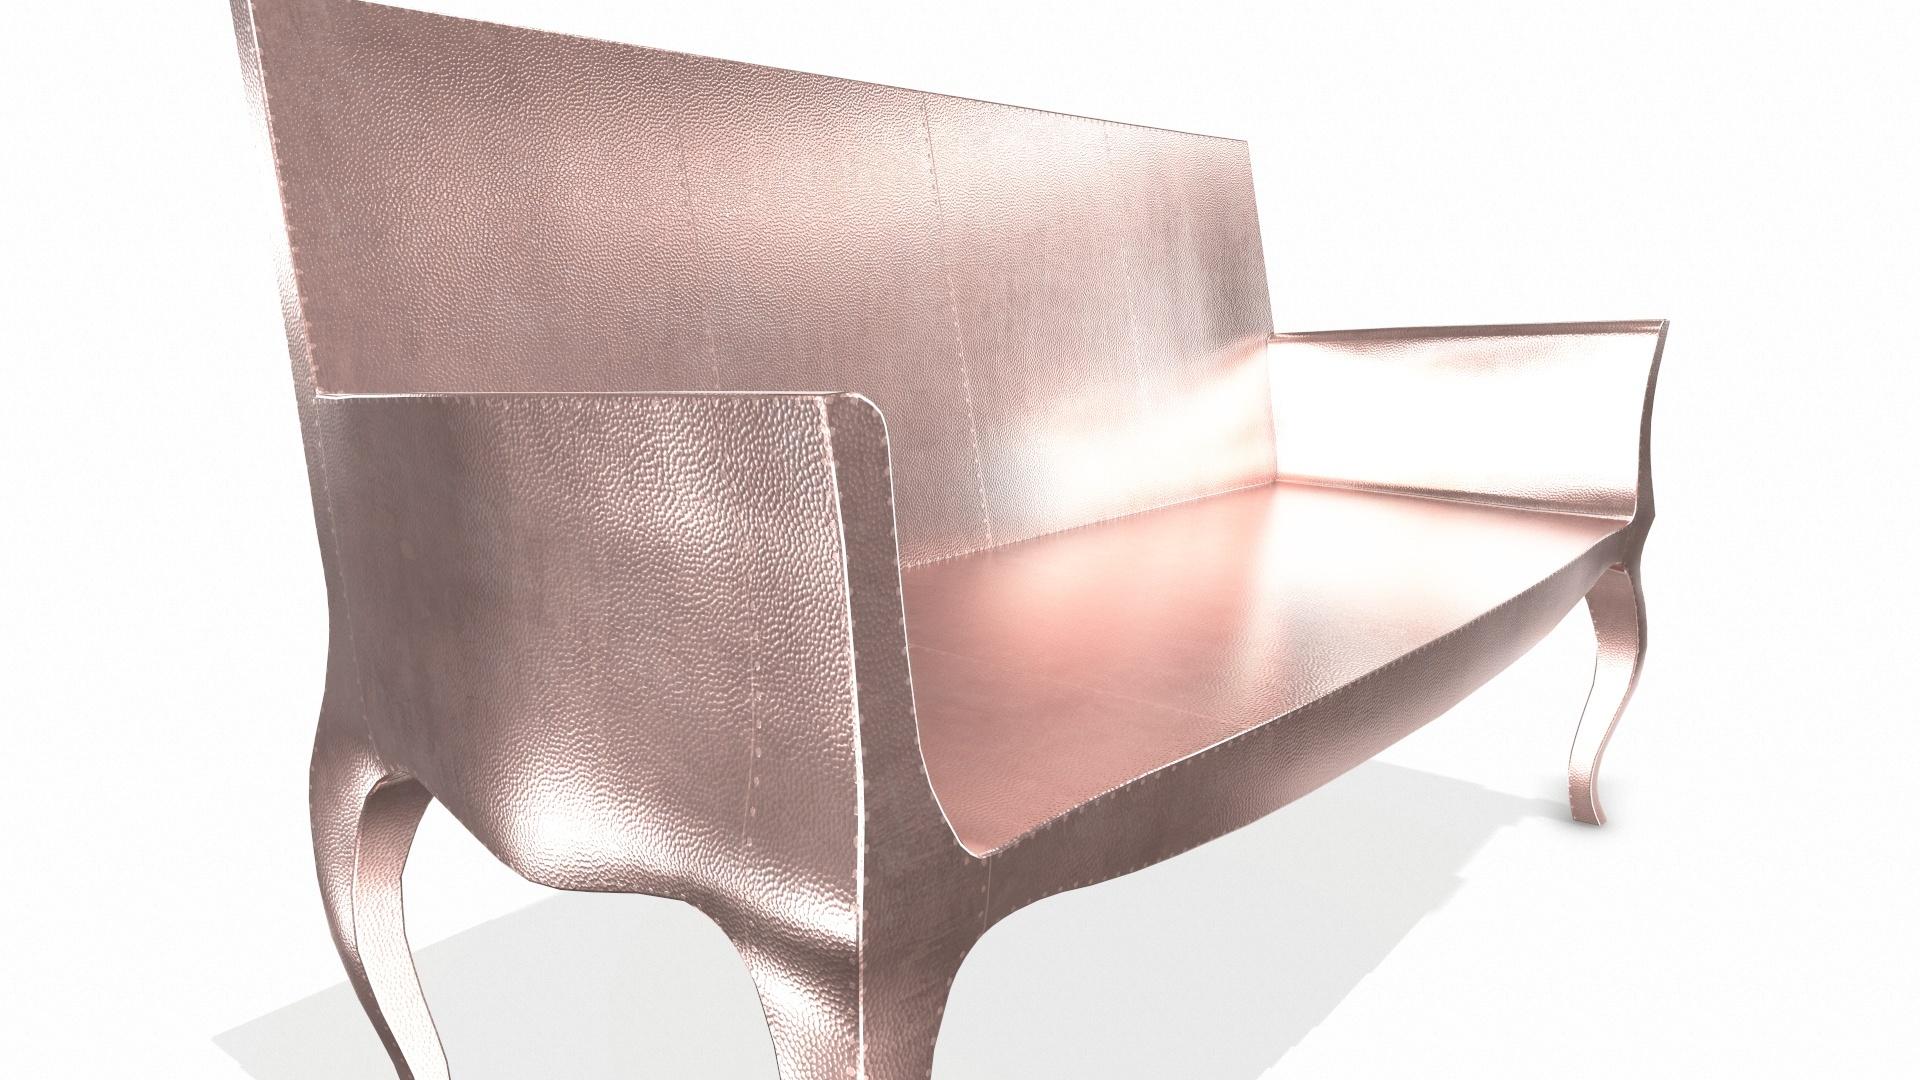 Metal Louise Settee Art Deco Settees in Mid. Hammered Copper by Paul Mathieu For Sale